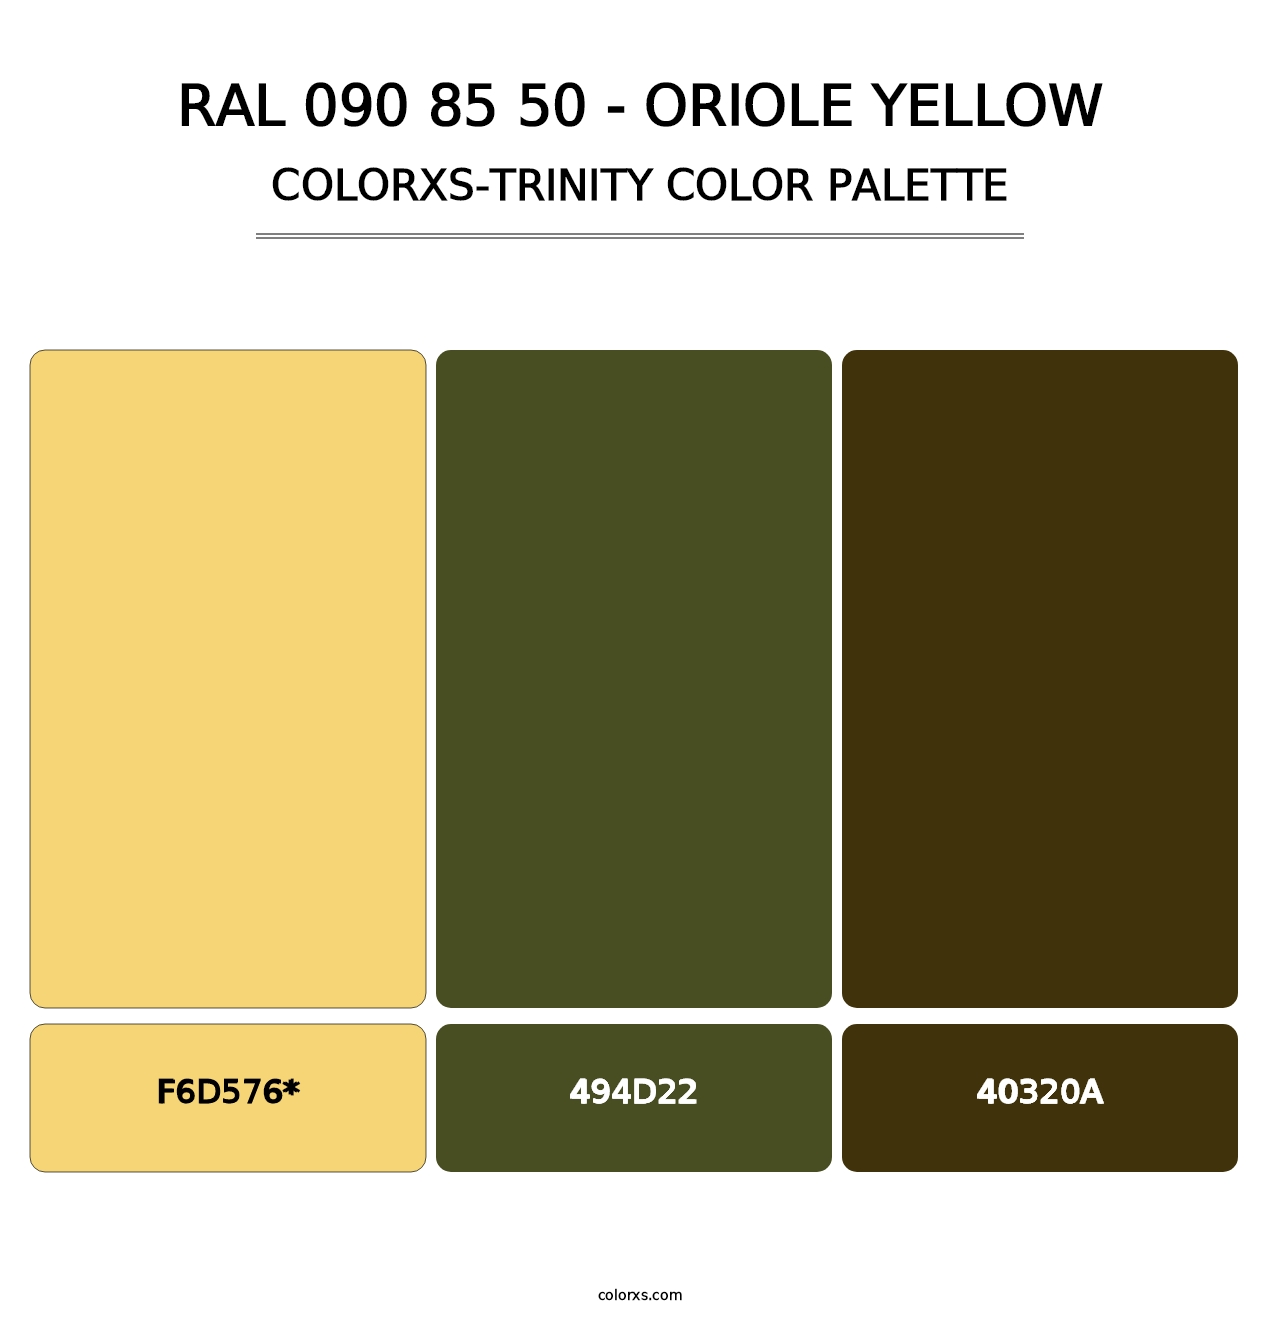 RAL 090 85 50 - Oriole Yellow - Colorxs Trinity Palette